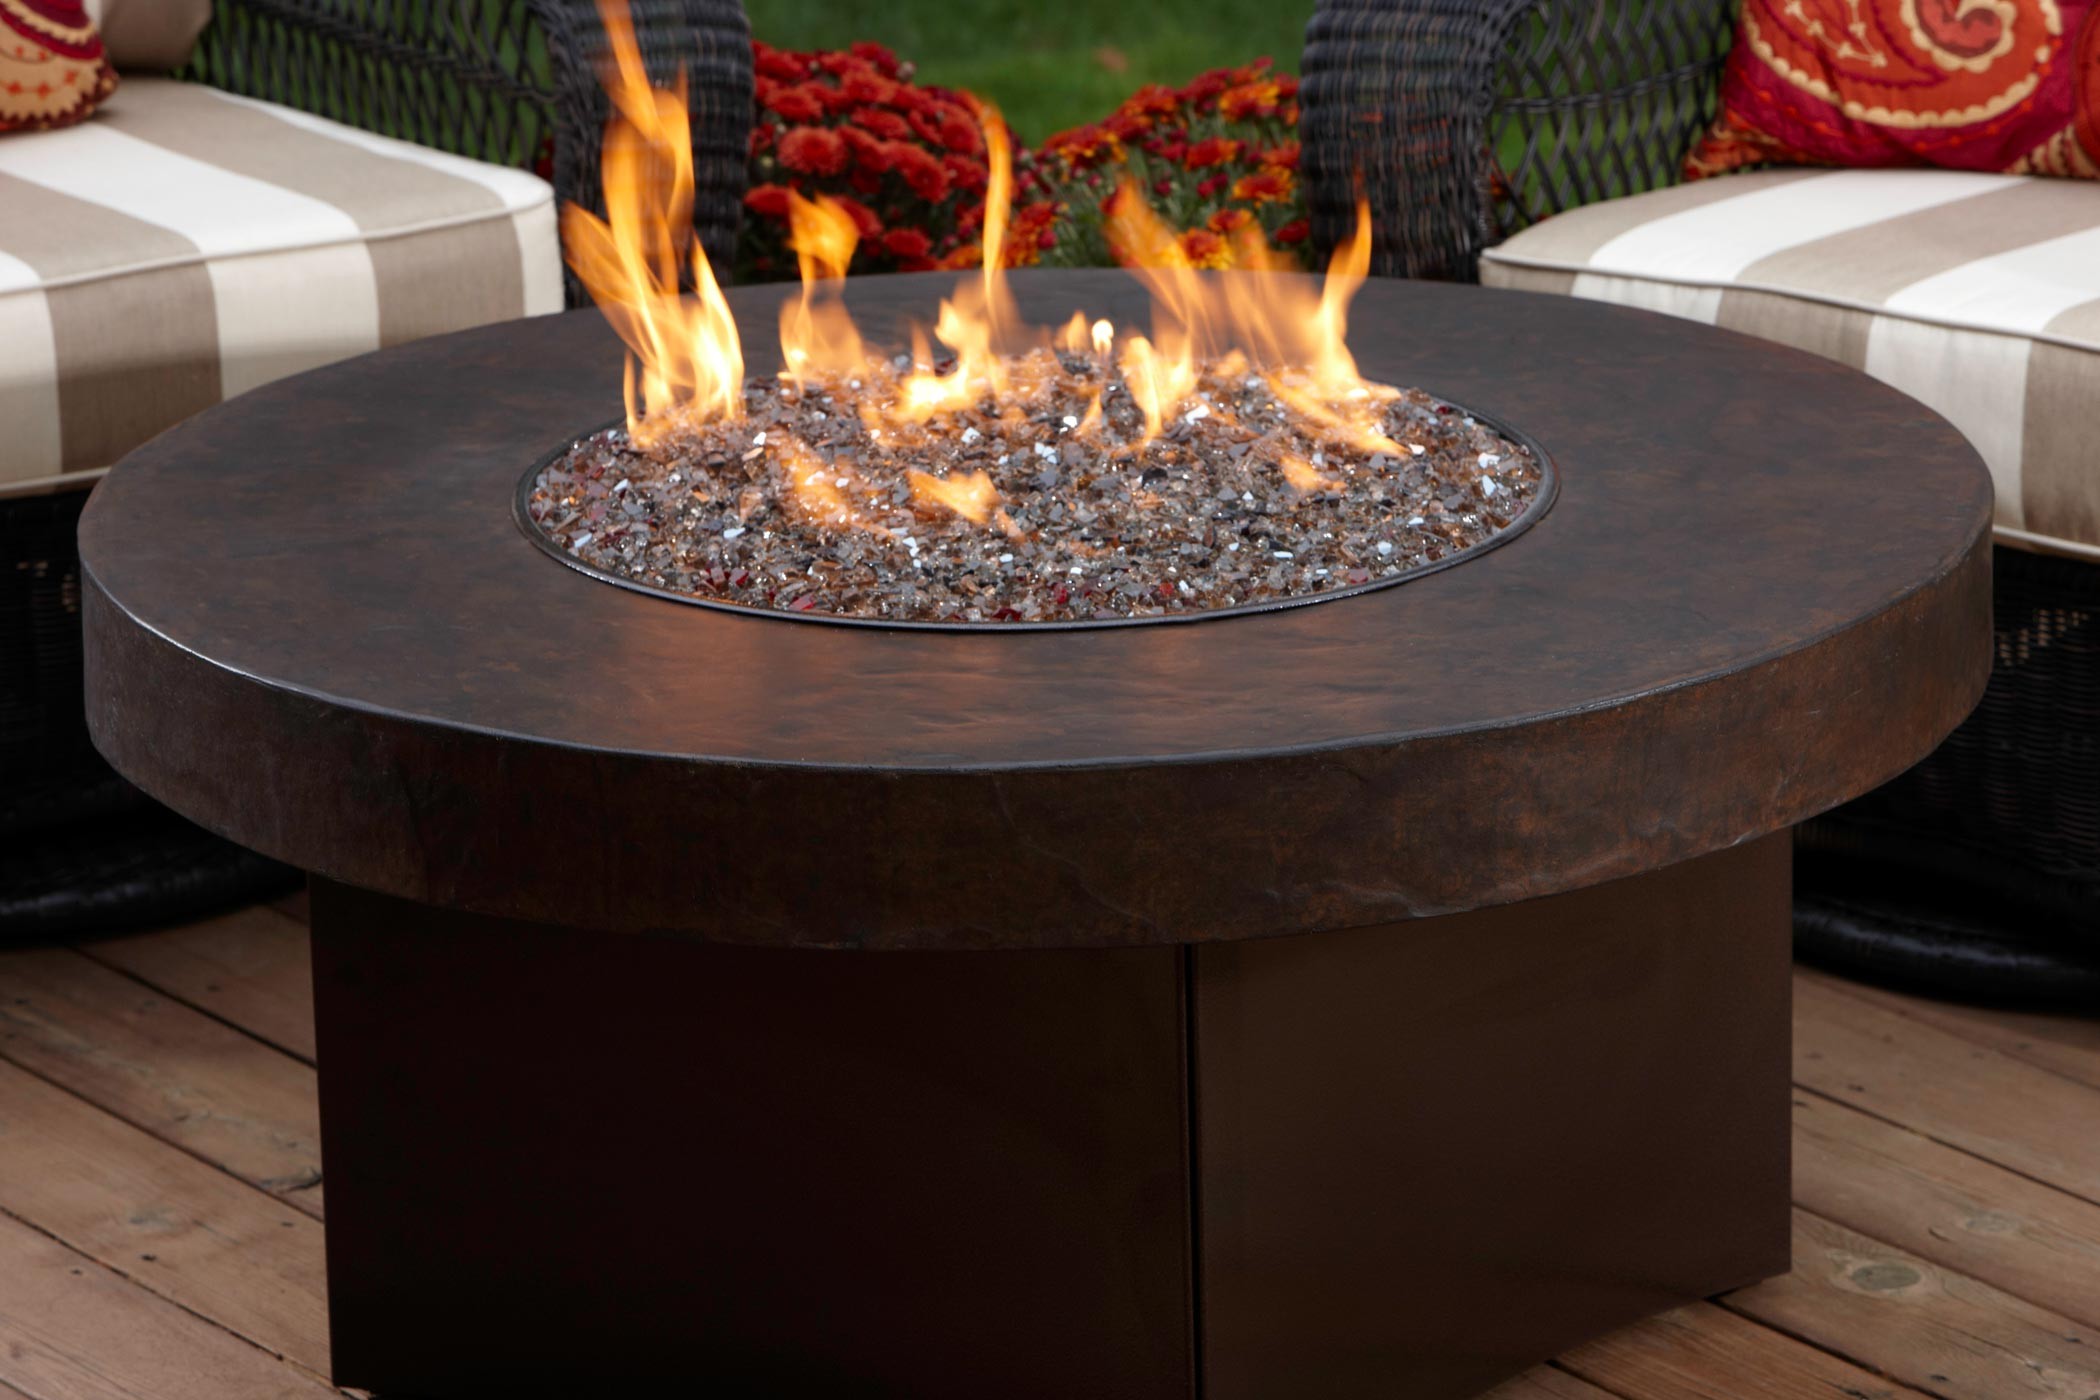 Gas Outdoor Fire Pits Australia, Outdoor Gas Fire Pits Australia